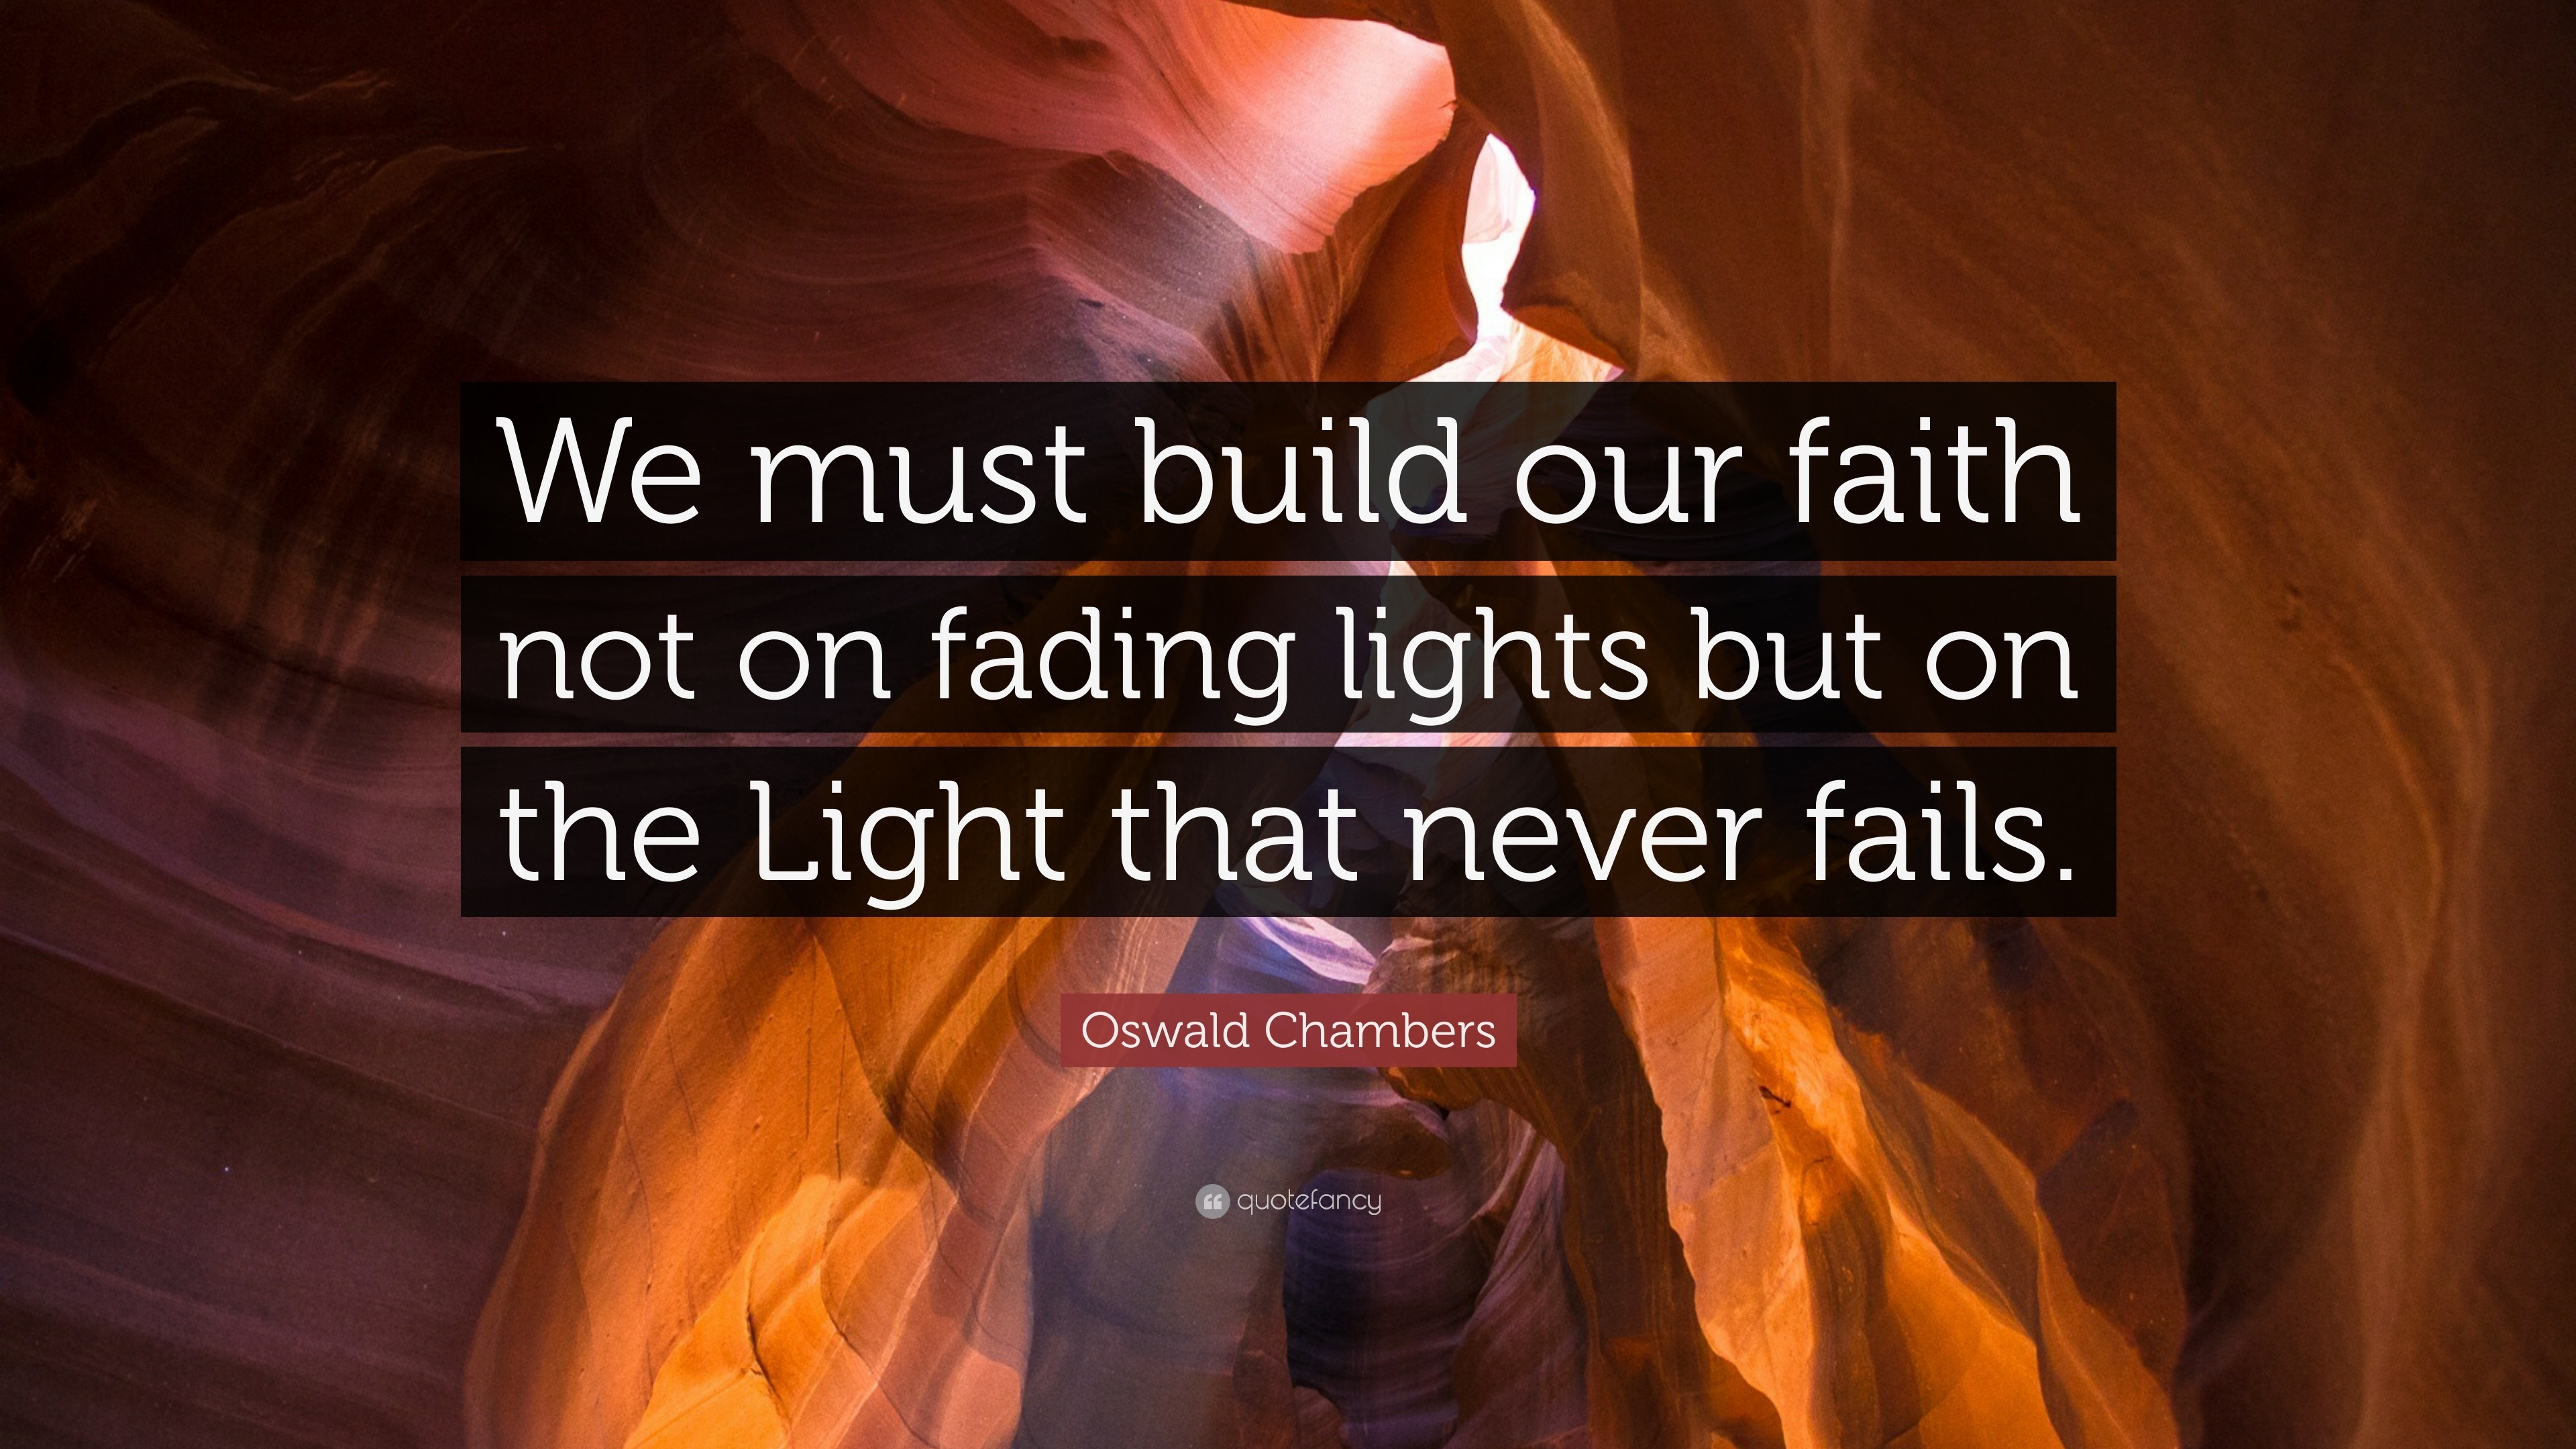 Oswald Chambers Quote: “We must build our faith not on lights but on the Light